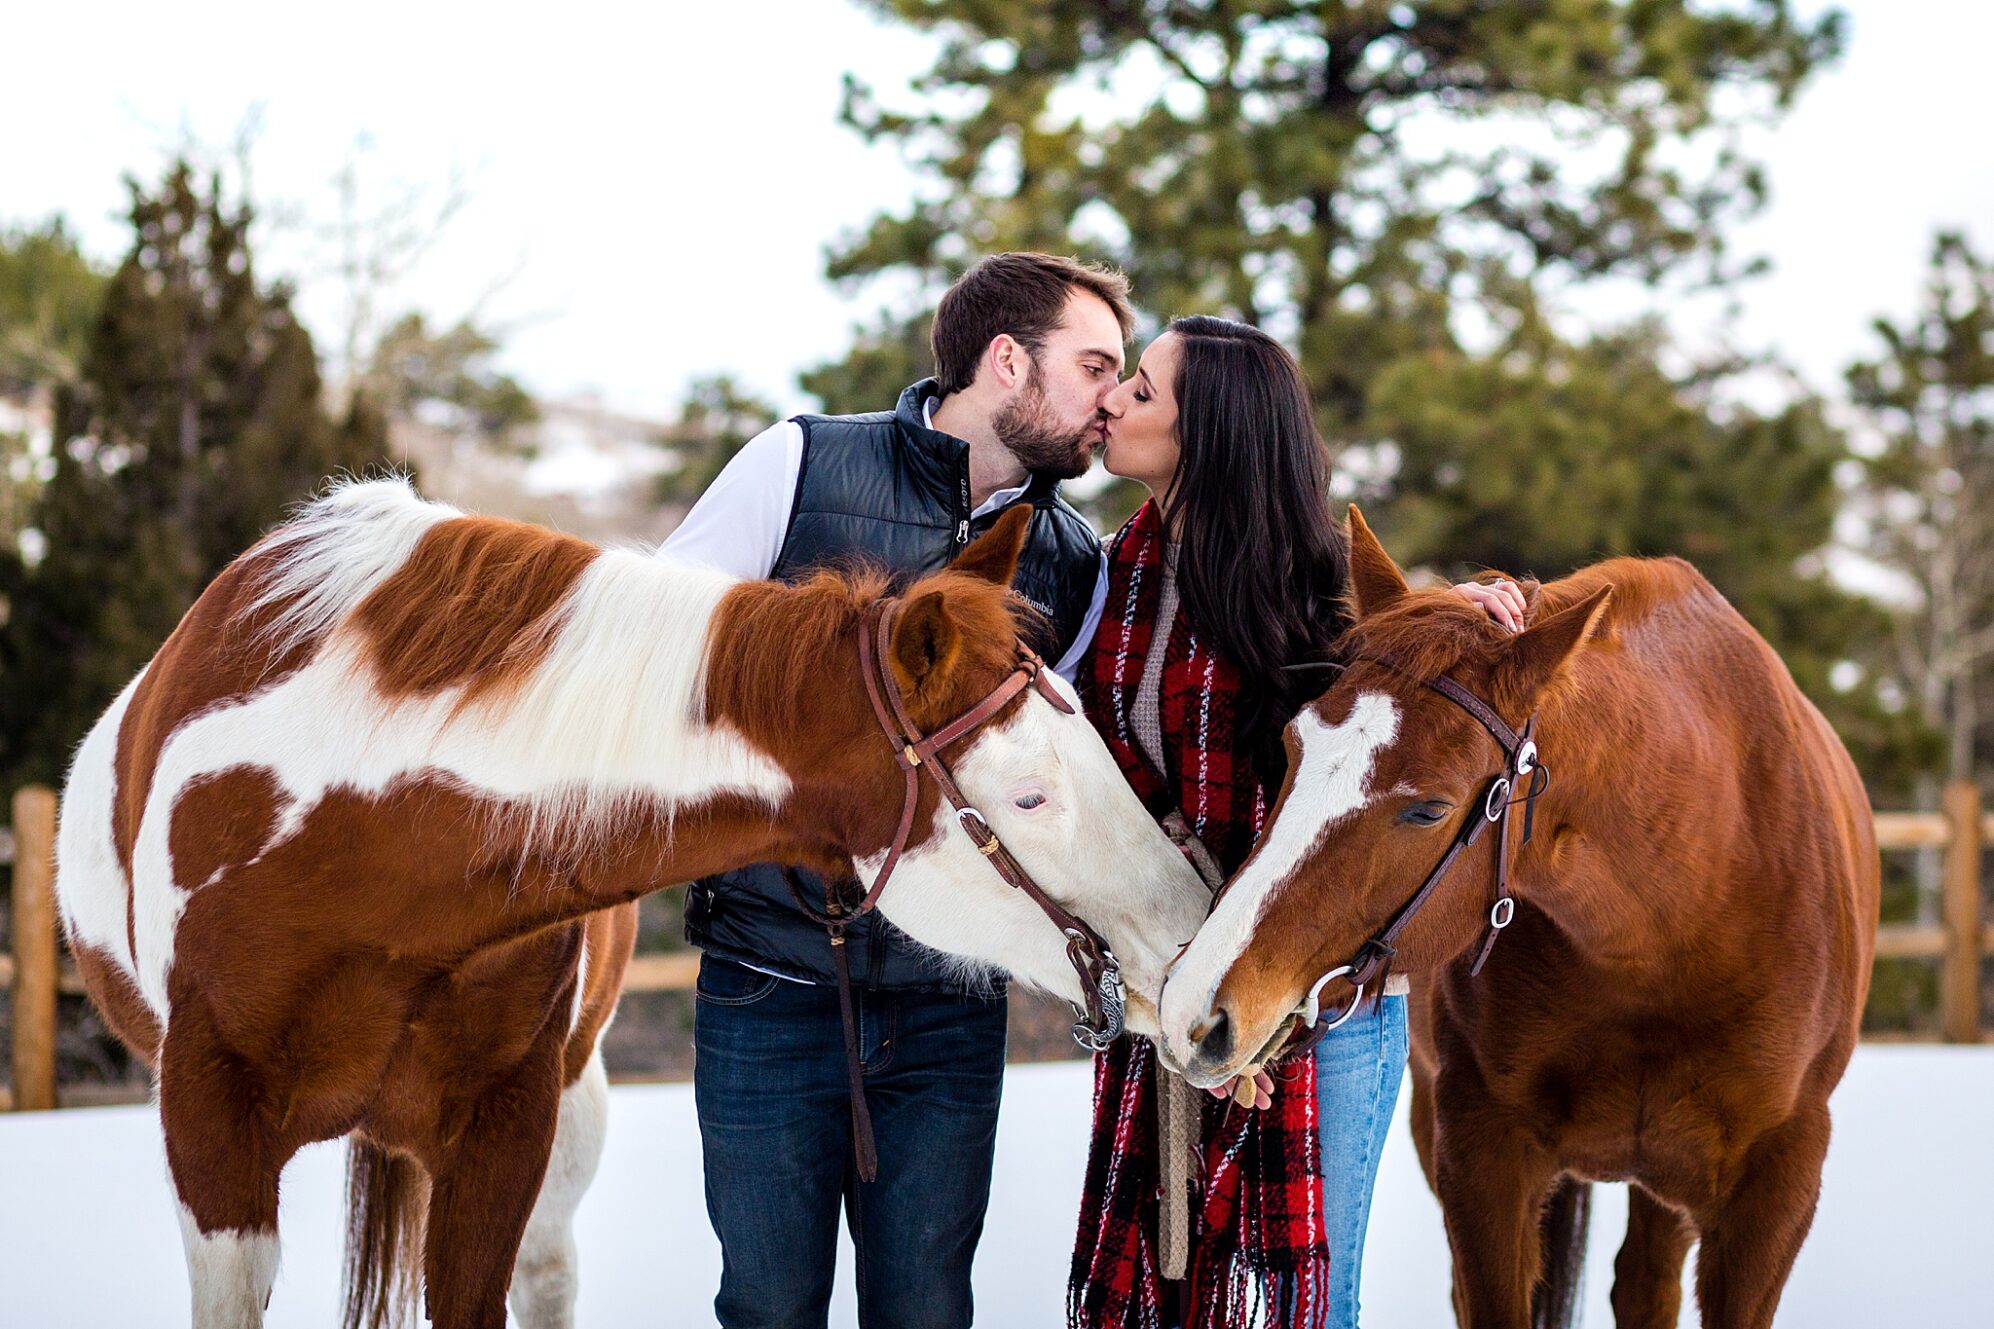 Morrison Private Ranch Engagement Session with Horses. Colorado Engagement Photography by All Digital Photo & Video. Morrison Engagement Photography, Horse Engagement Session, Ranch Engagement Session, Colorado Engagement Photos, Mountain Engagement Photos, Winter Engagement Photos, Snowy Engagement Photos, Mountain Engagement Photography, Denver Engagement Photography, Rocky Mountain Engagement